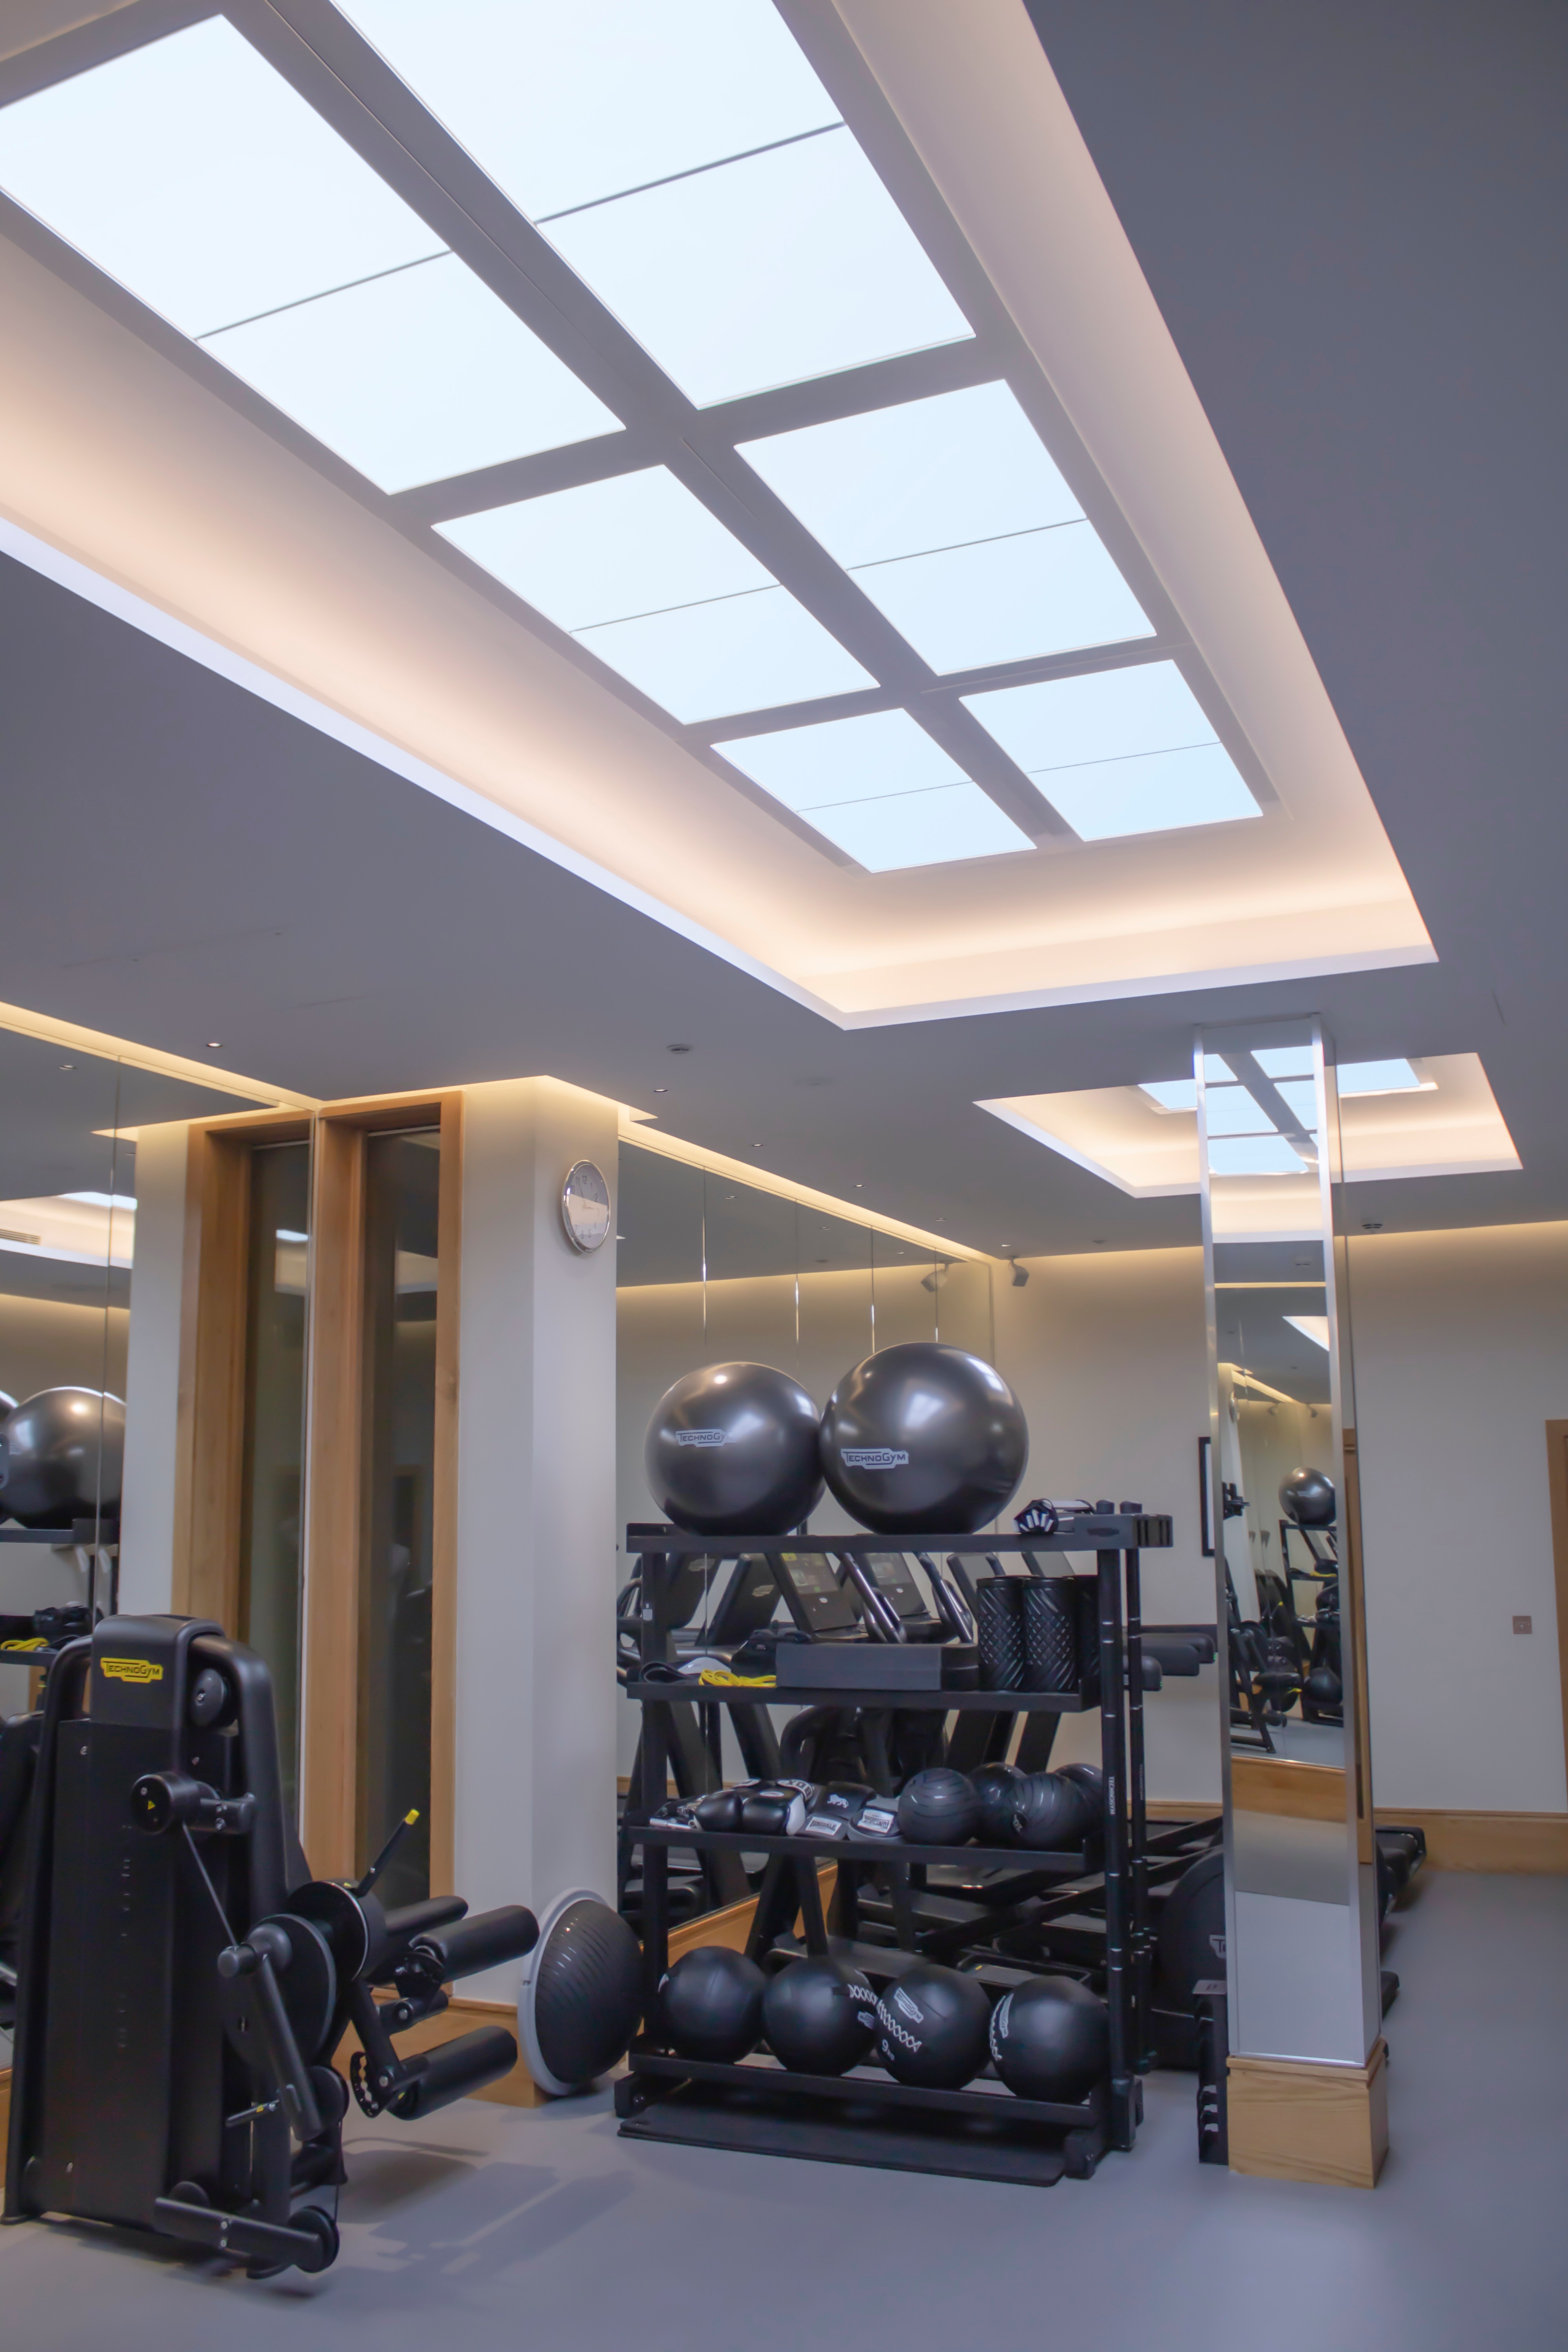 Innerscene installation case study lighting above exercise ball and other equipment at Aman Spa The Connaught Hotel London